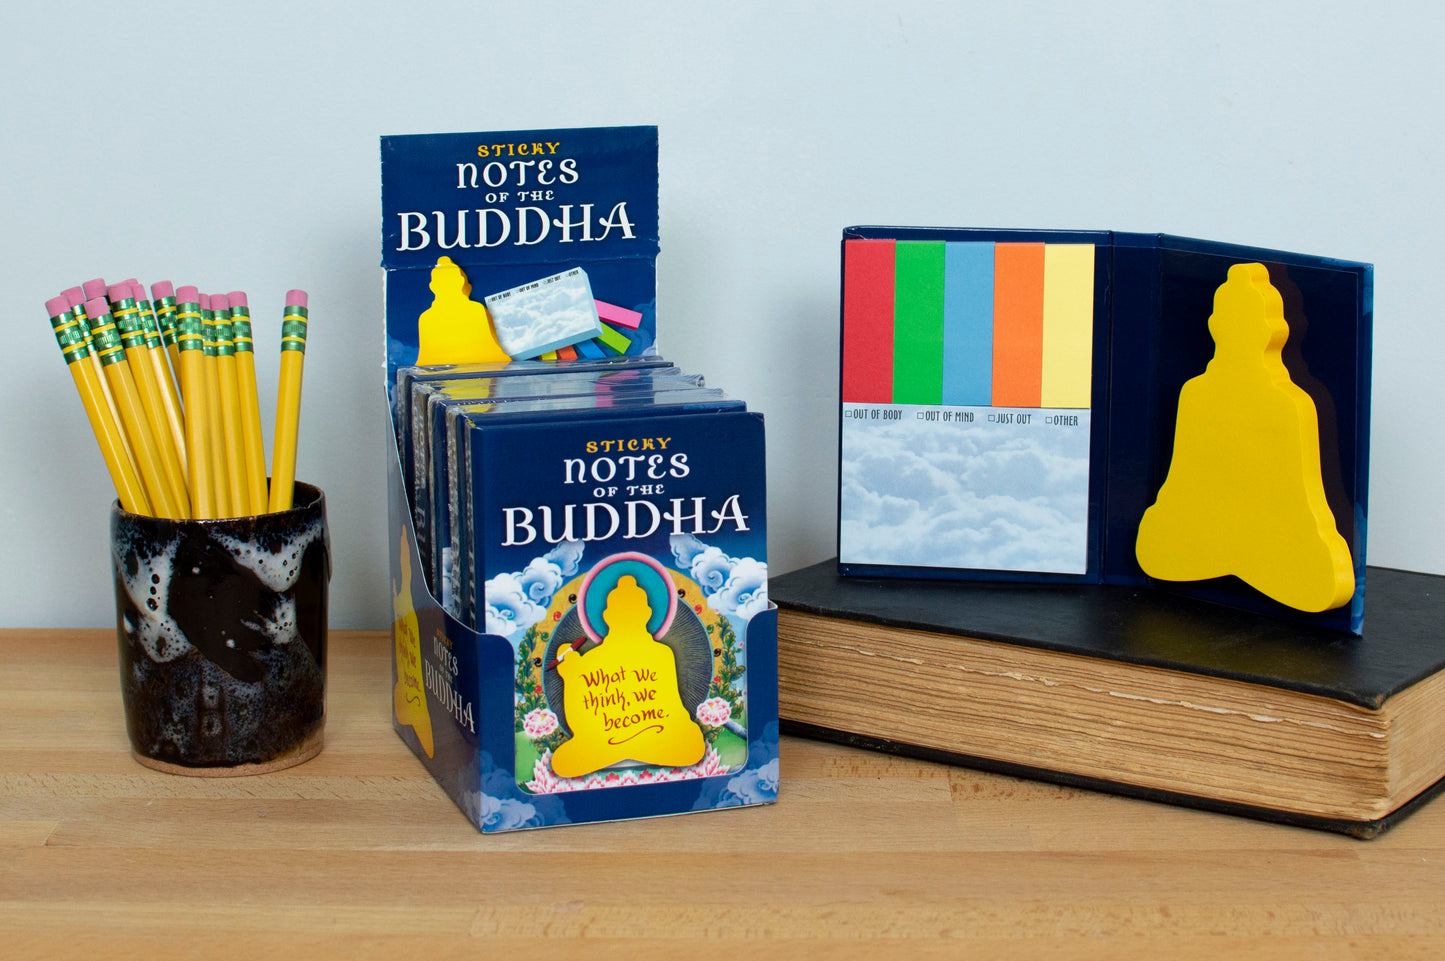 Sticky Notes of the Buddha